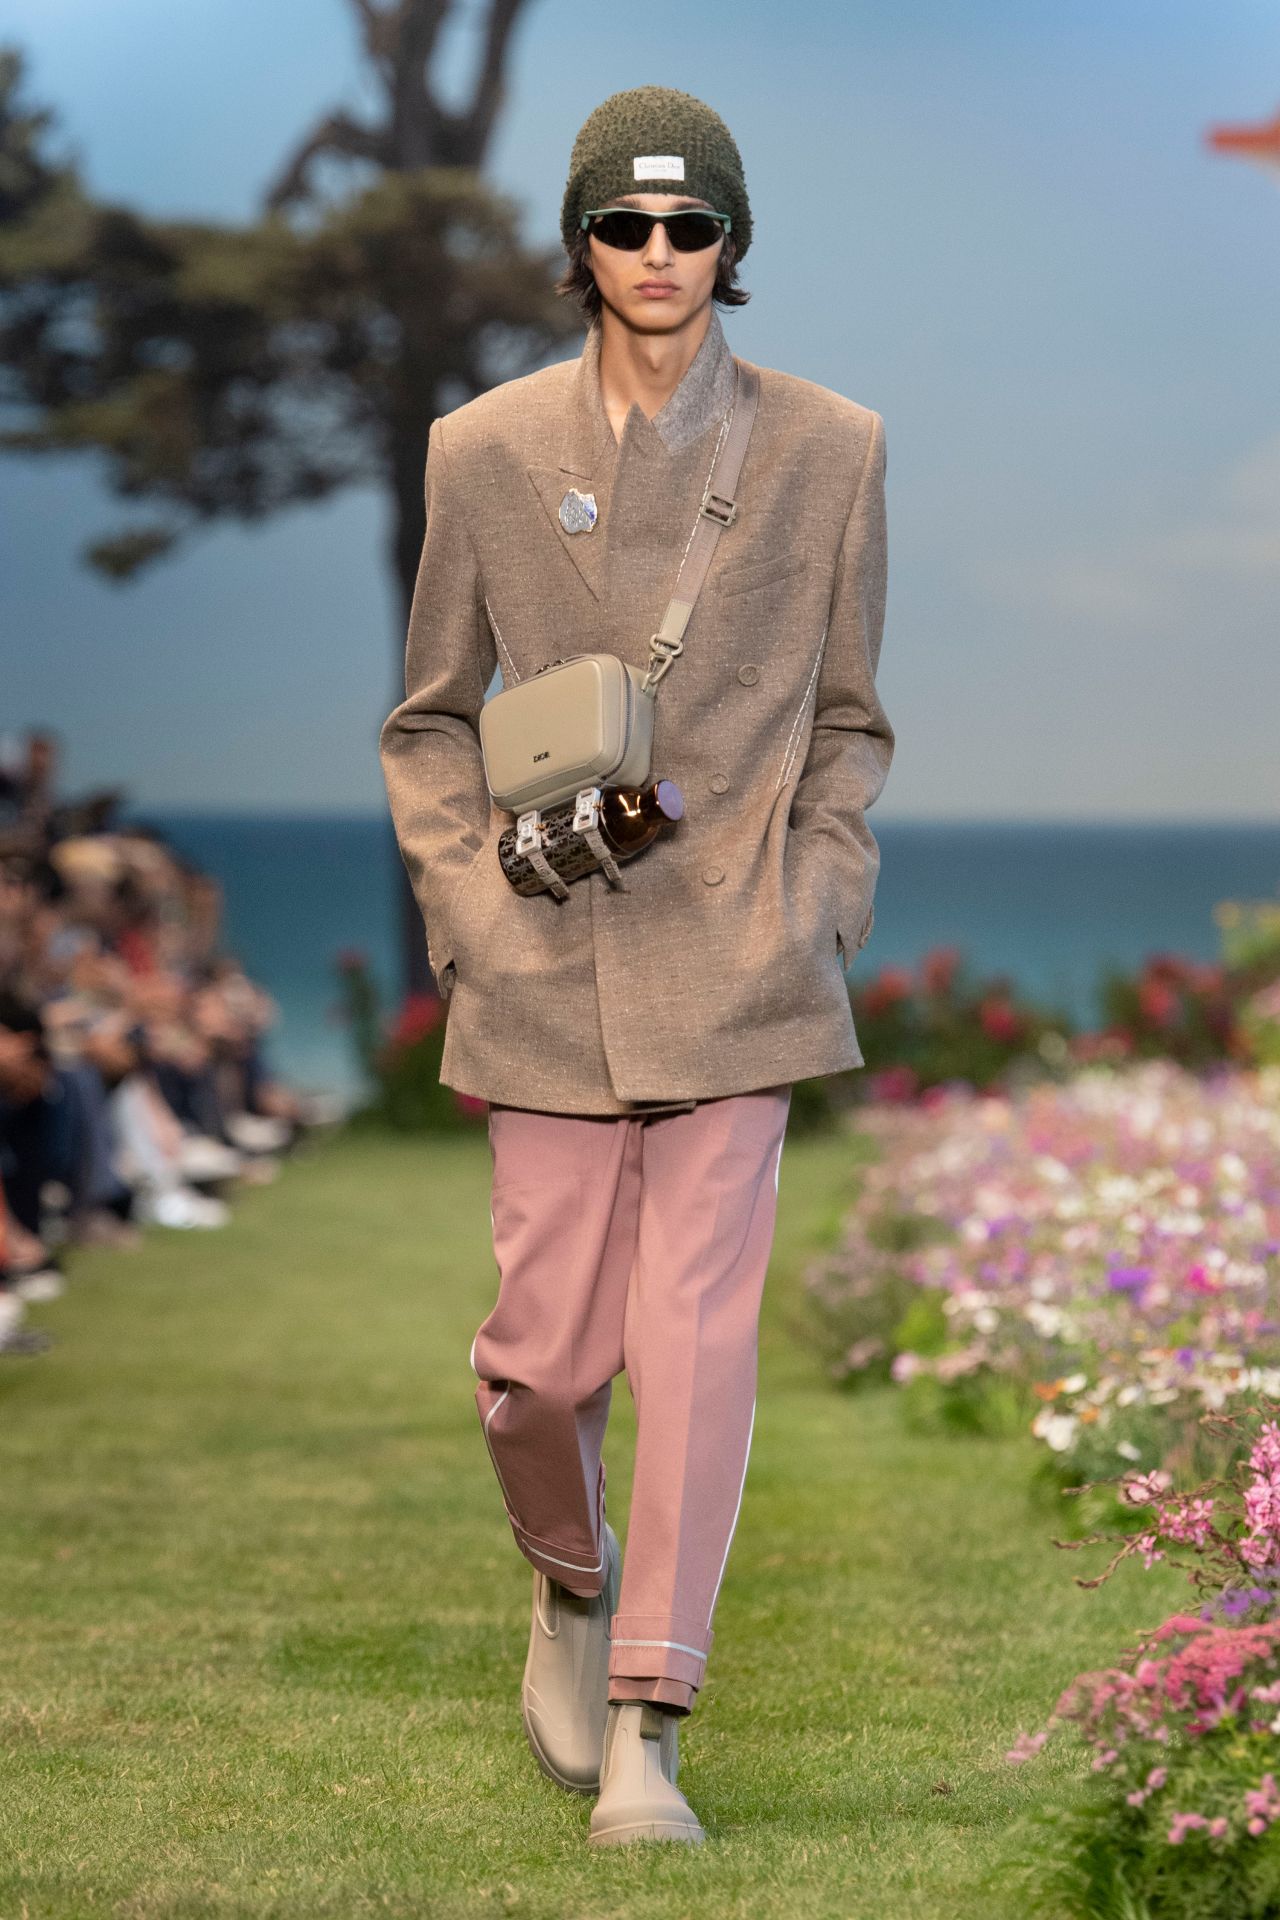 While Dior's collection included camera bags and hydroflasks fit for the outdoors.